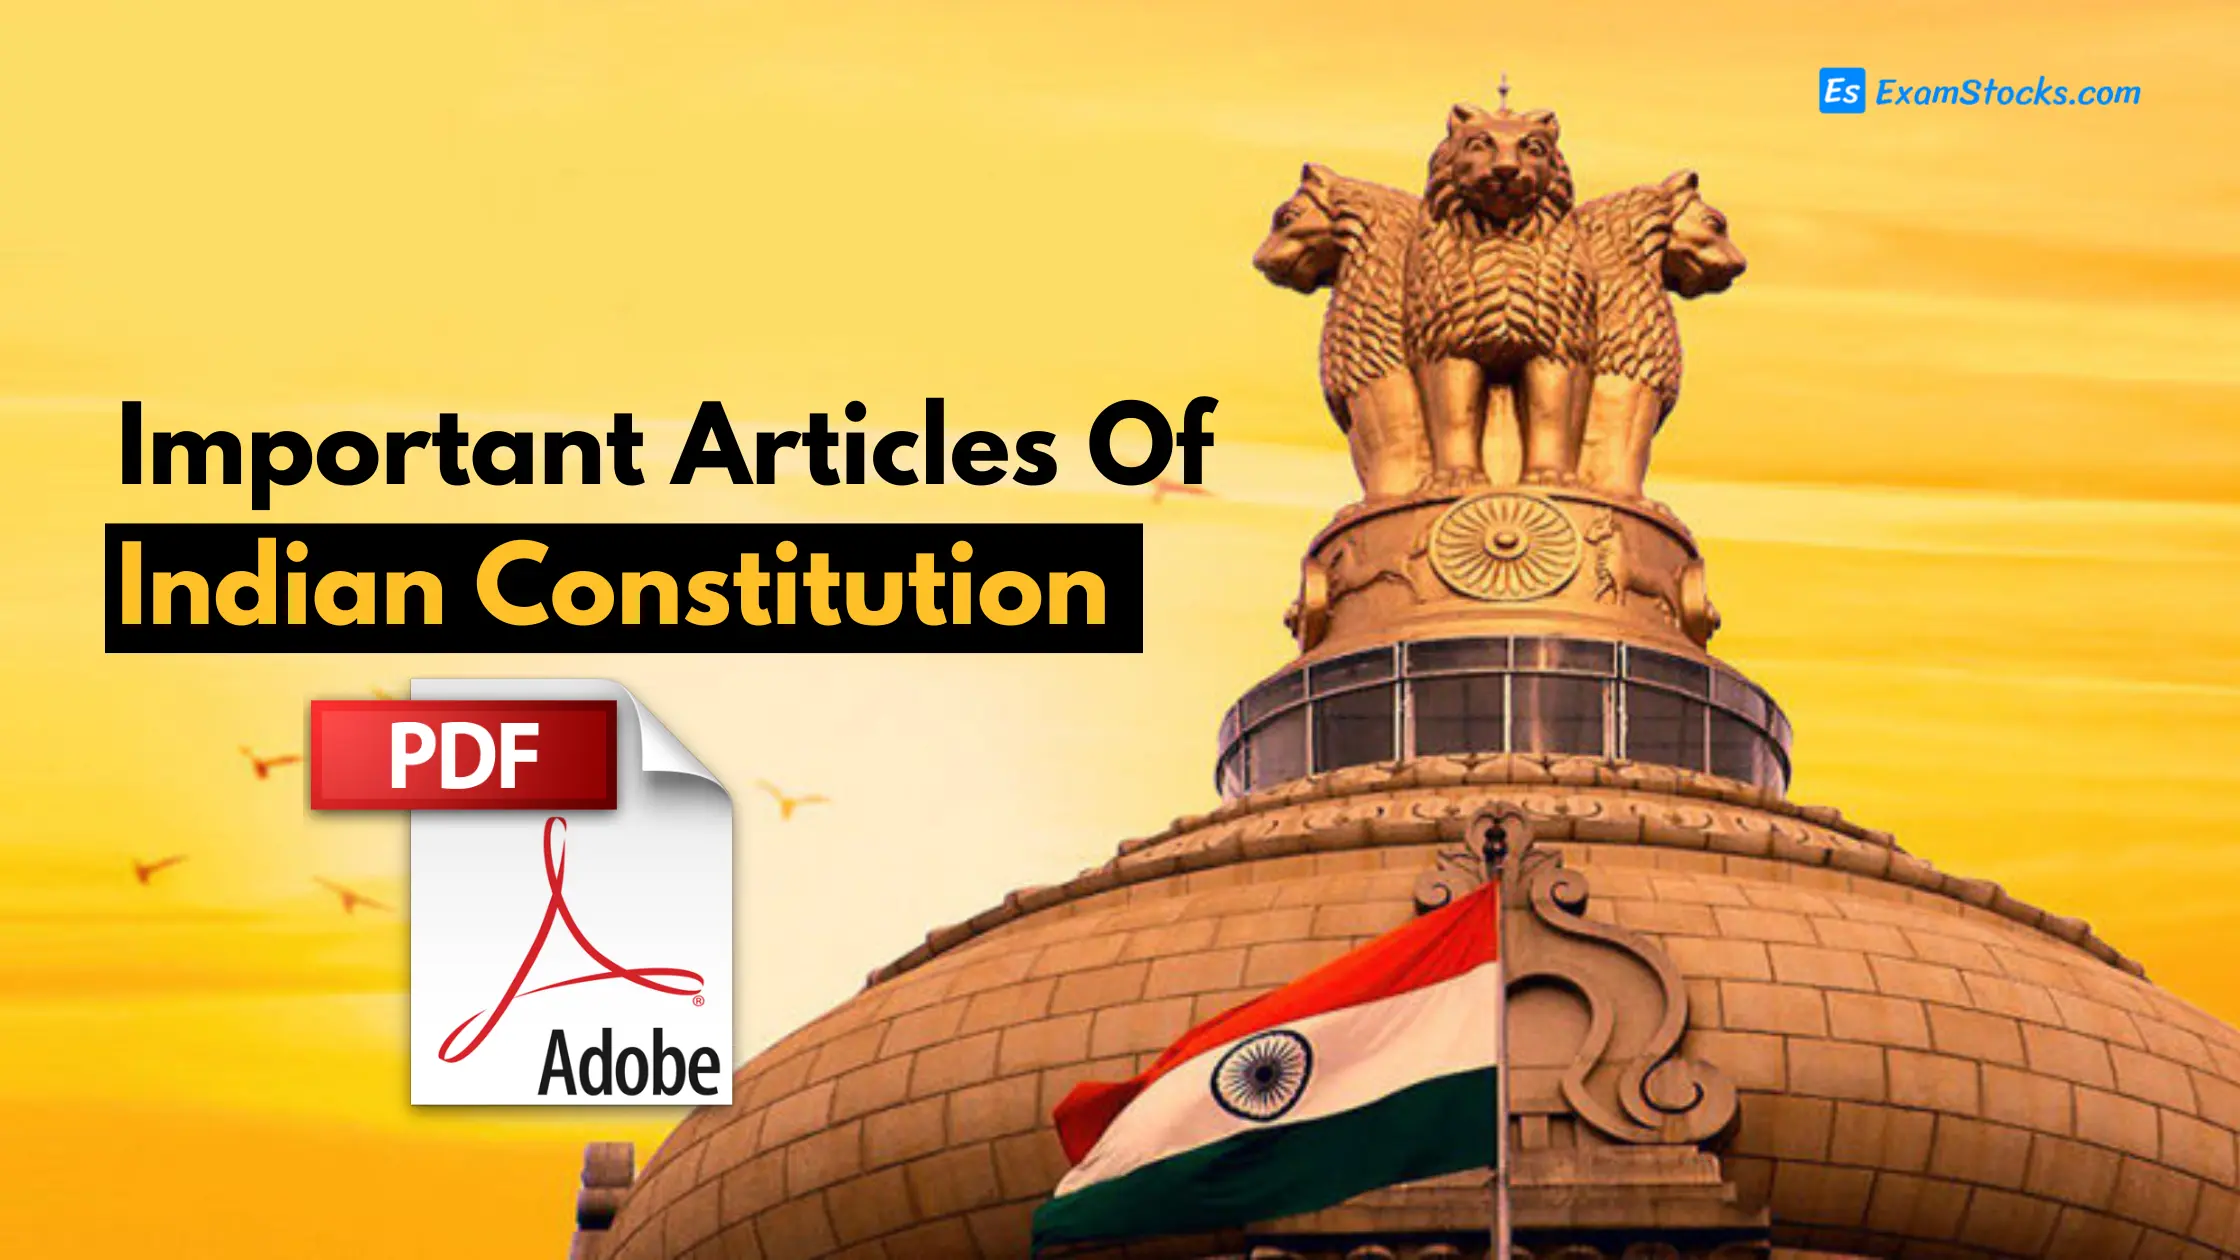 Complete List Of Important Articles Of Indian Constitution PDF